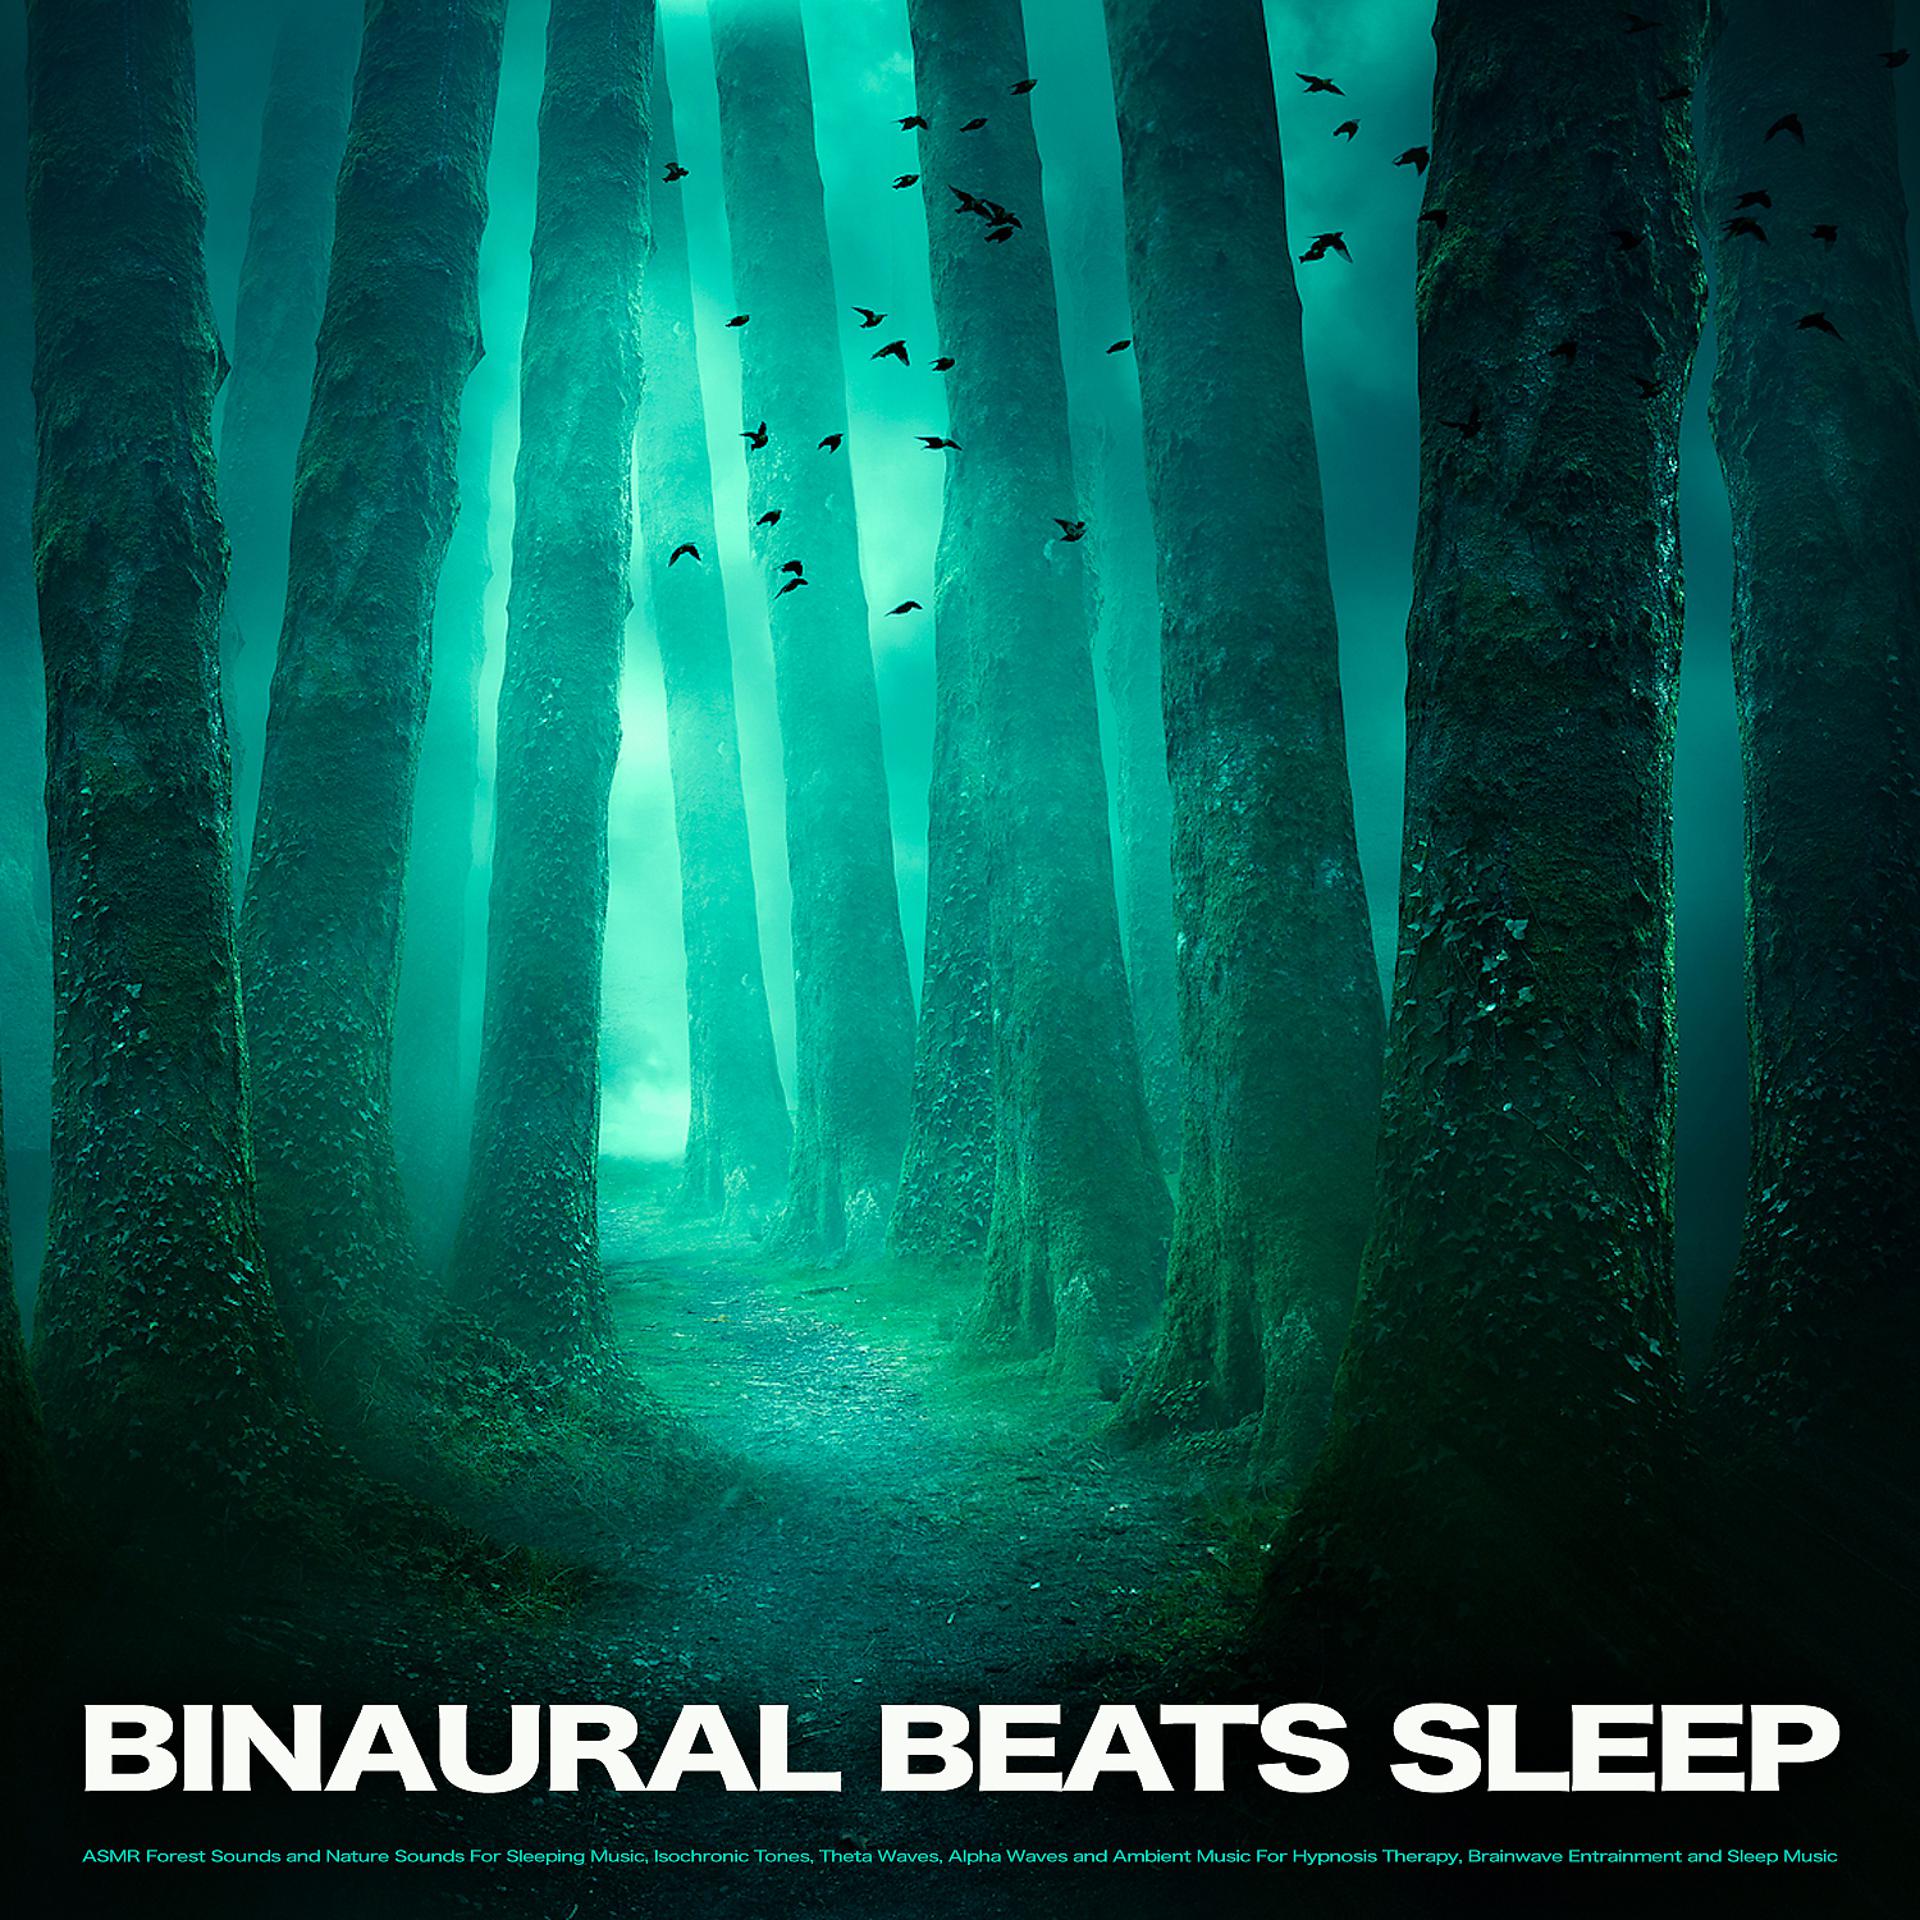 Постер альбома Binaural Beats Sleep: ASMR Forest Sounds and Nature Sounds For Sleeping Music, Isochronic Tones, Theta Waves, Alpha Waves and Ambient Music For Hypnosis Therapy, Brainwave Entrainment and Sleep Music